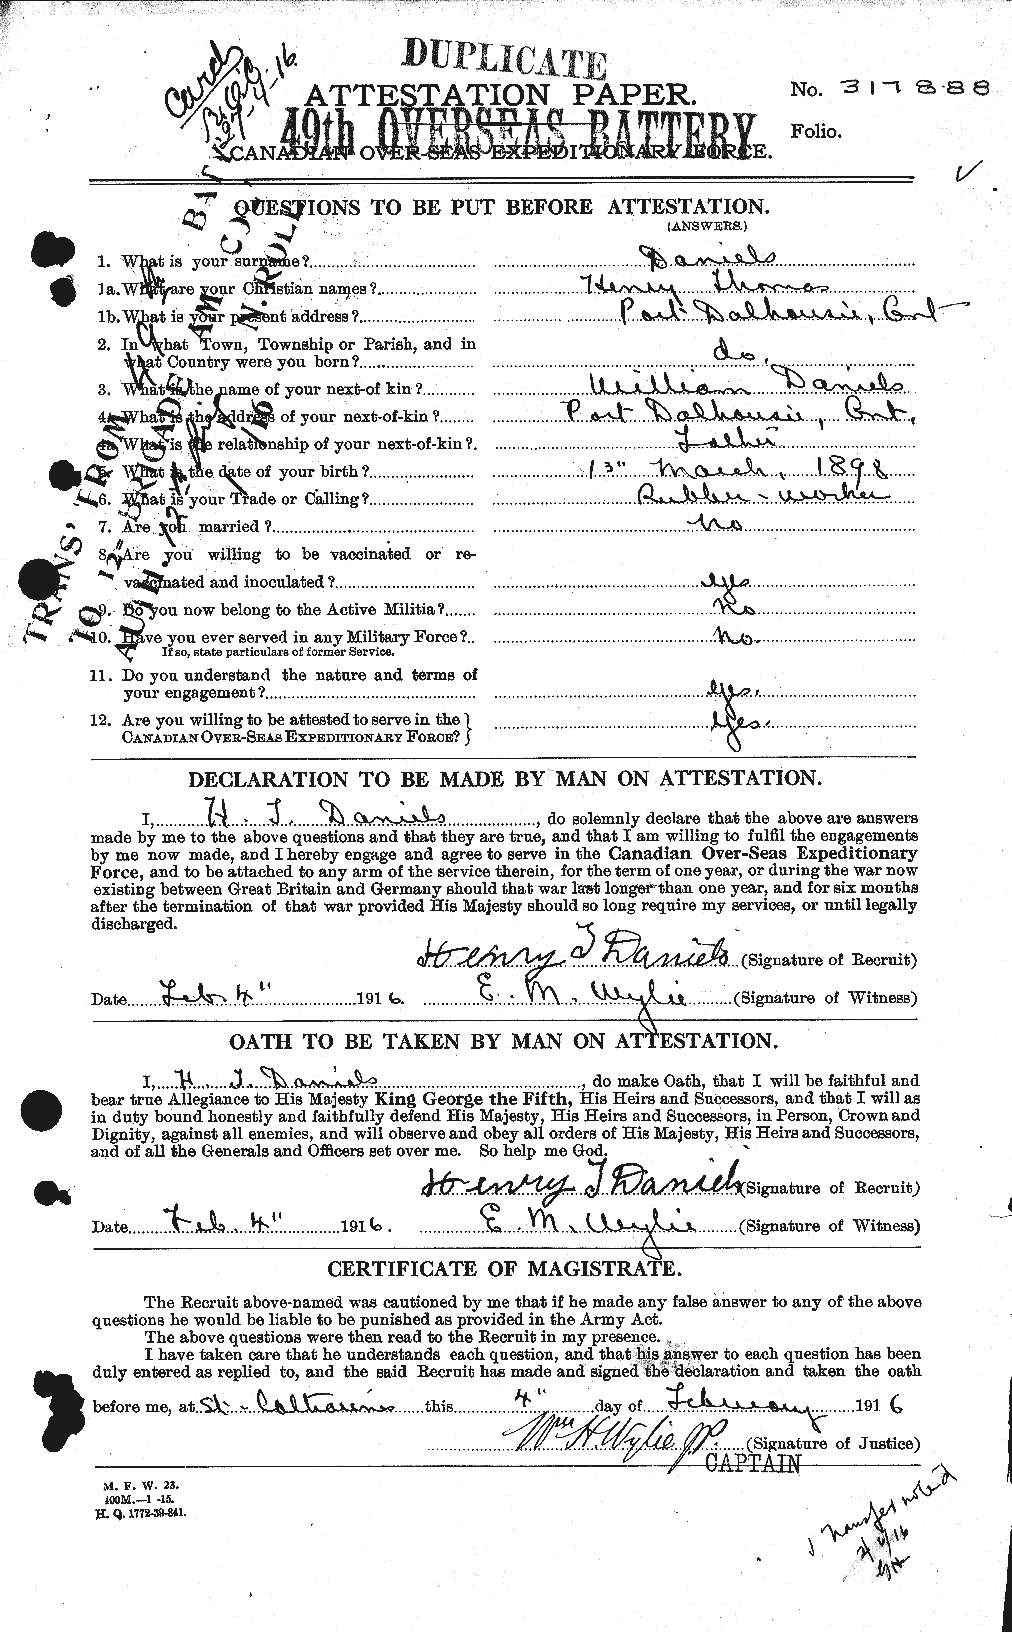 Personnel Records of the First World War - CEF 279616a